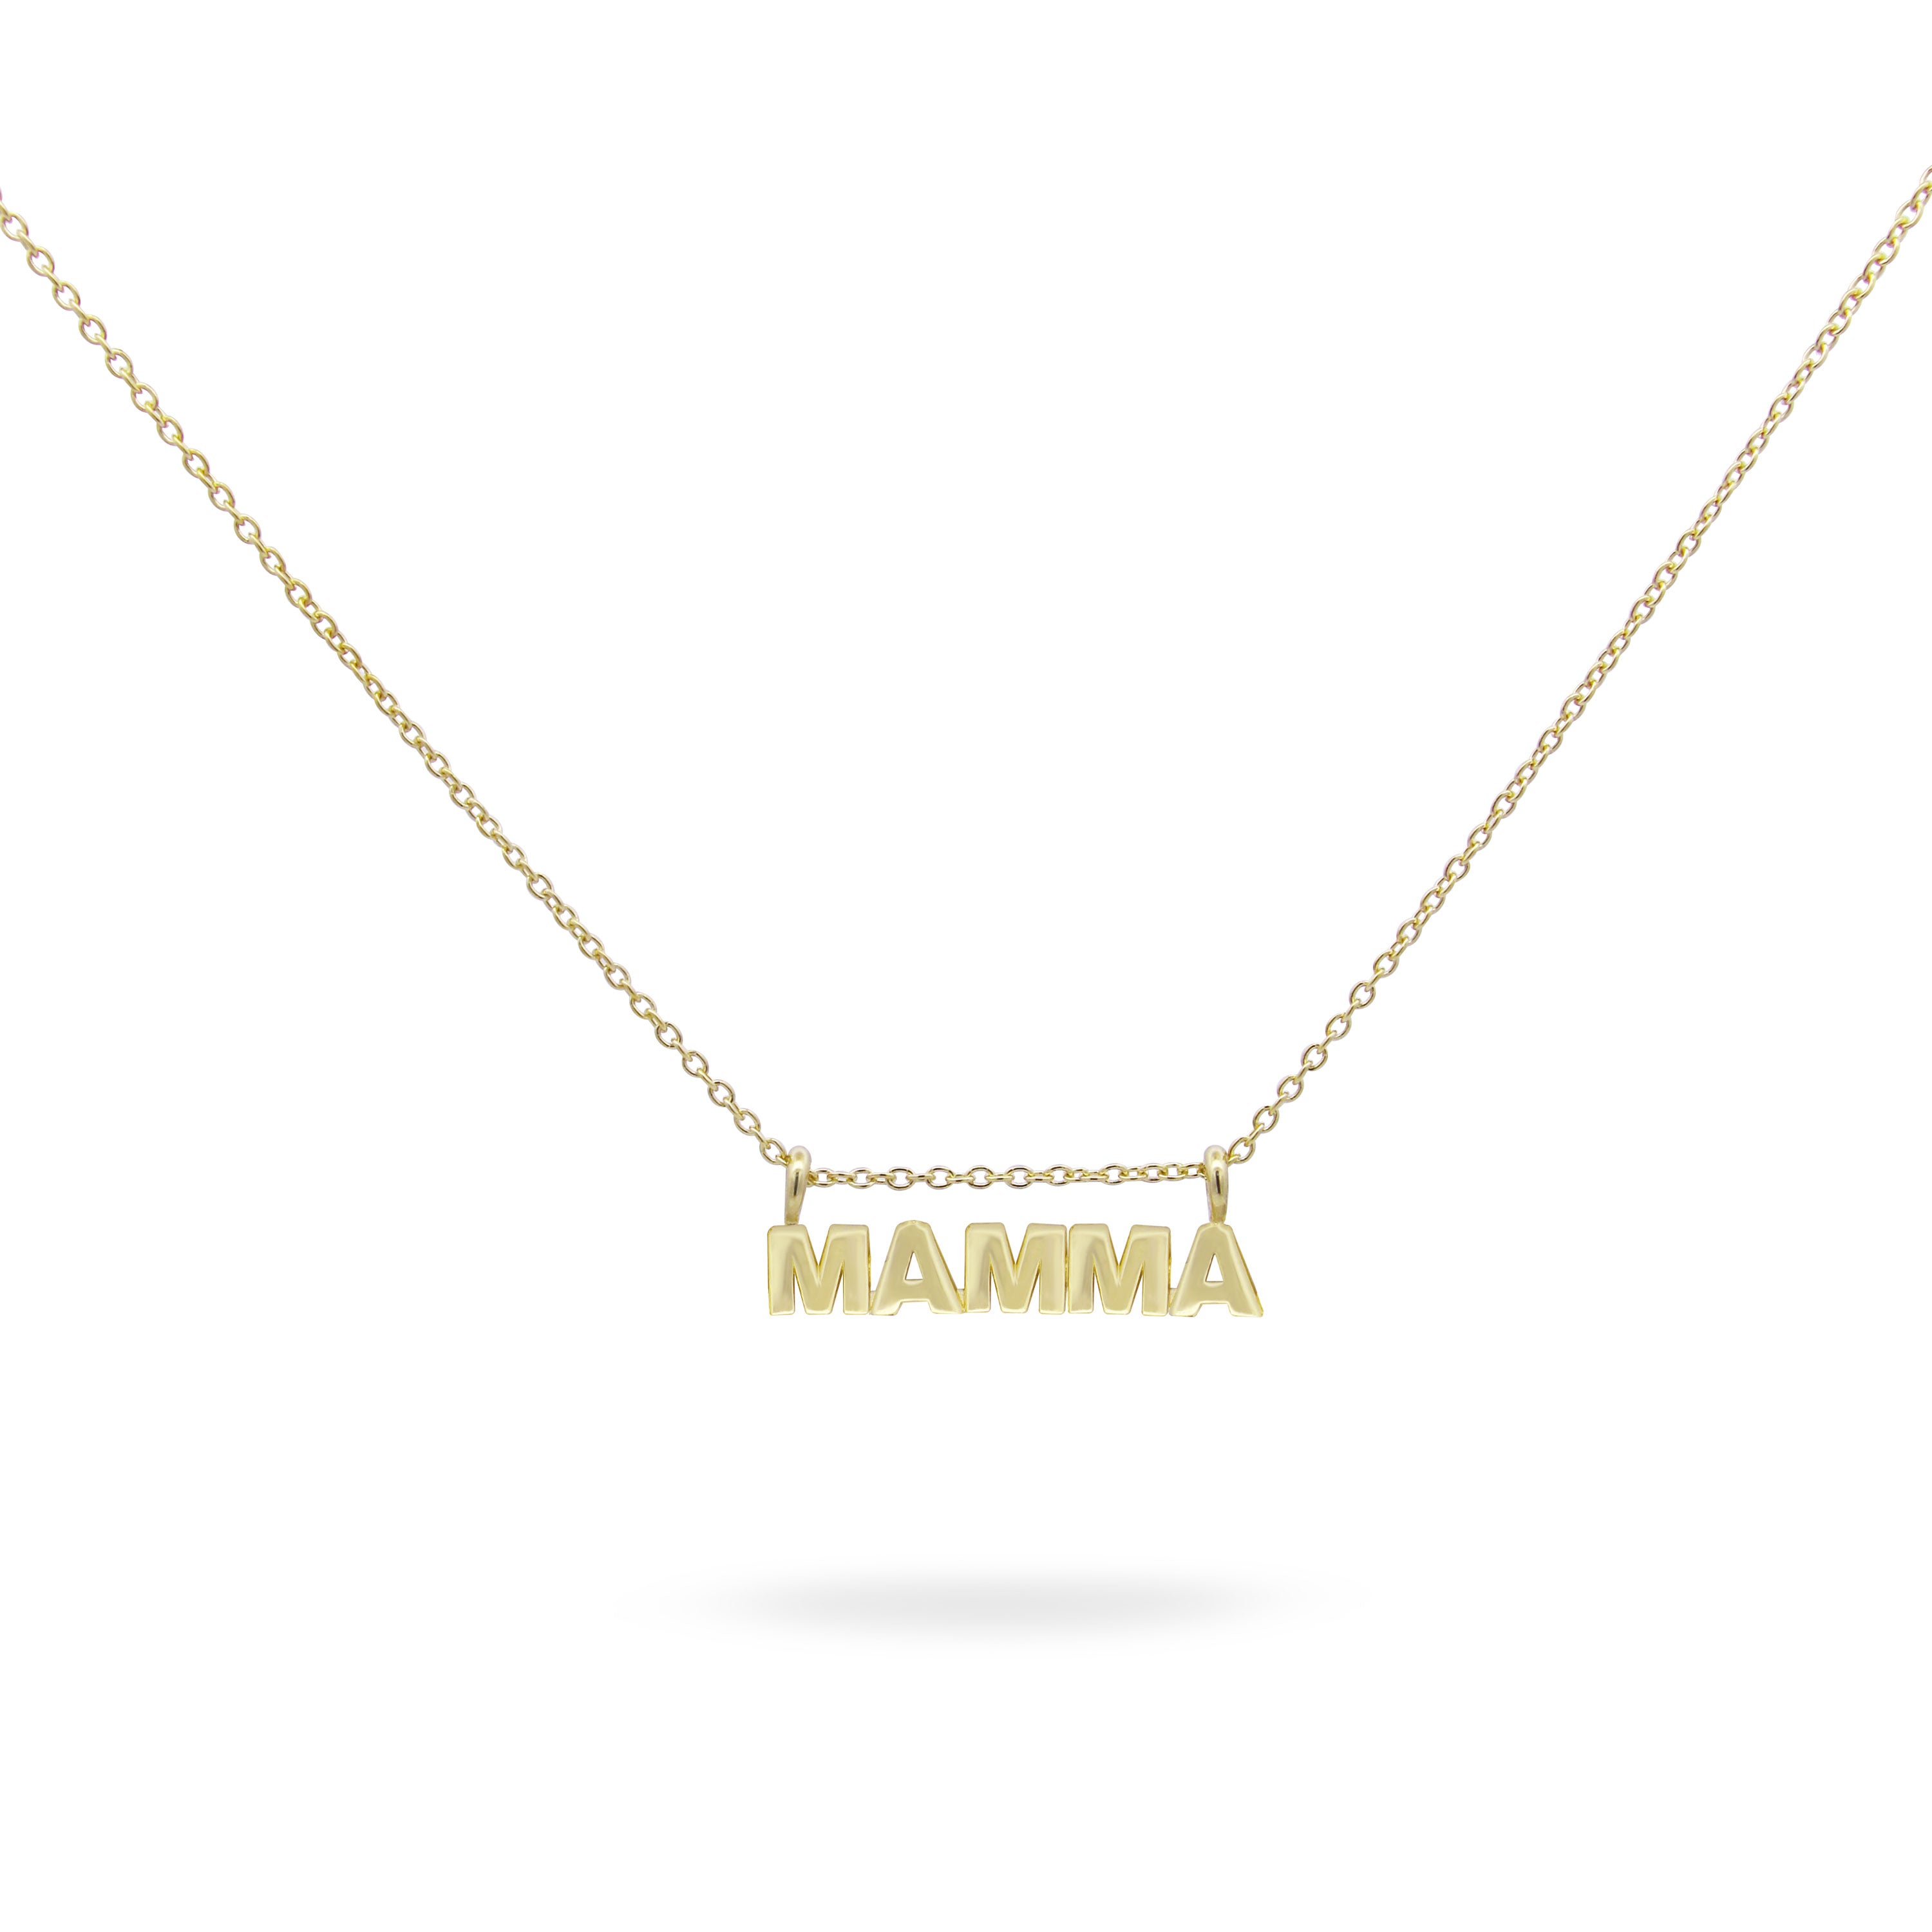 Chokers - Choker with MAMMA basic - 1 | Rue des Mille